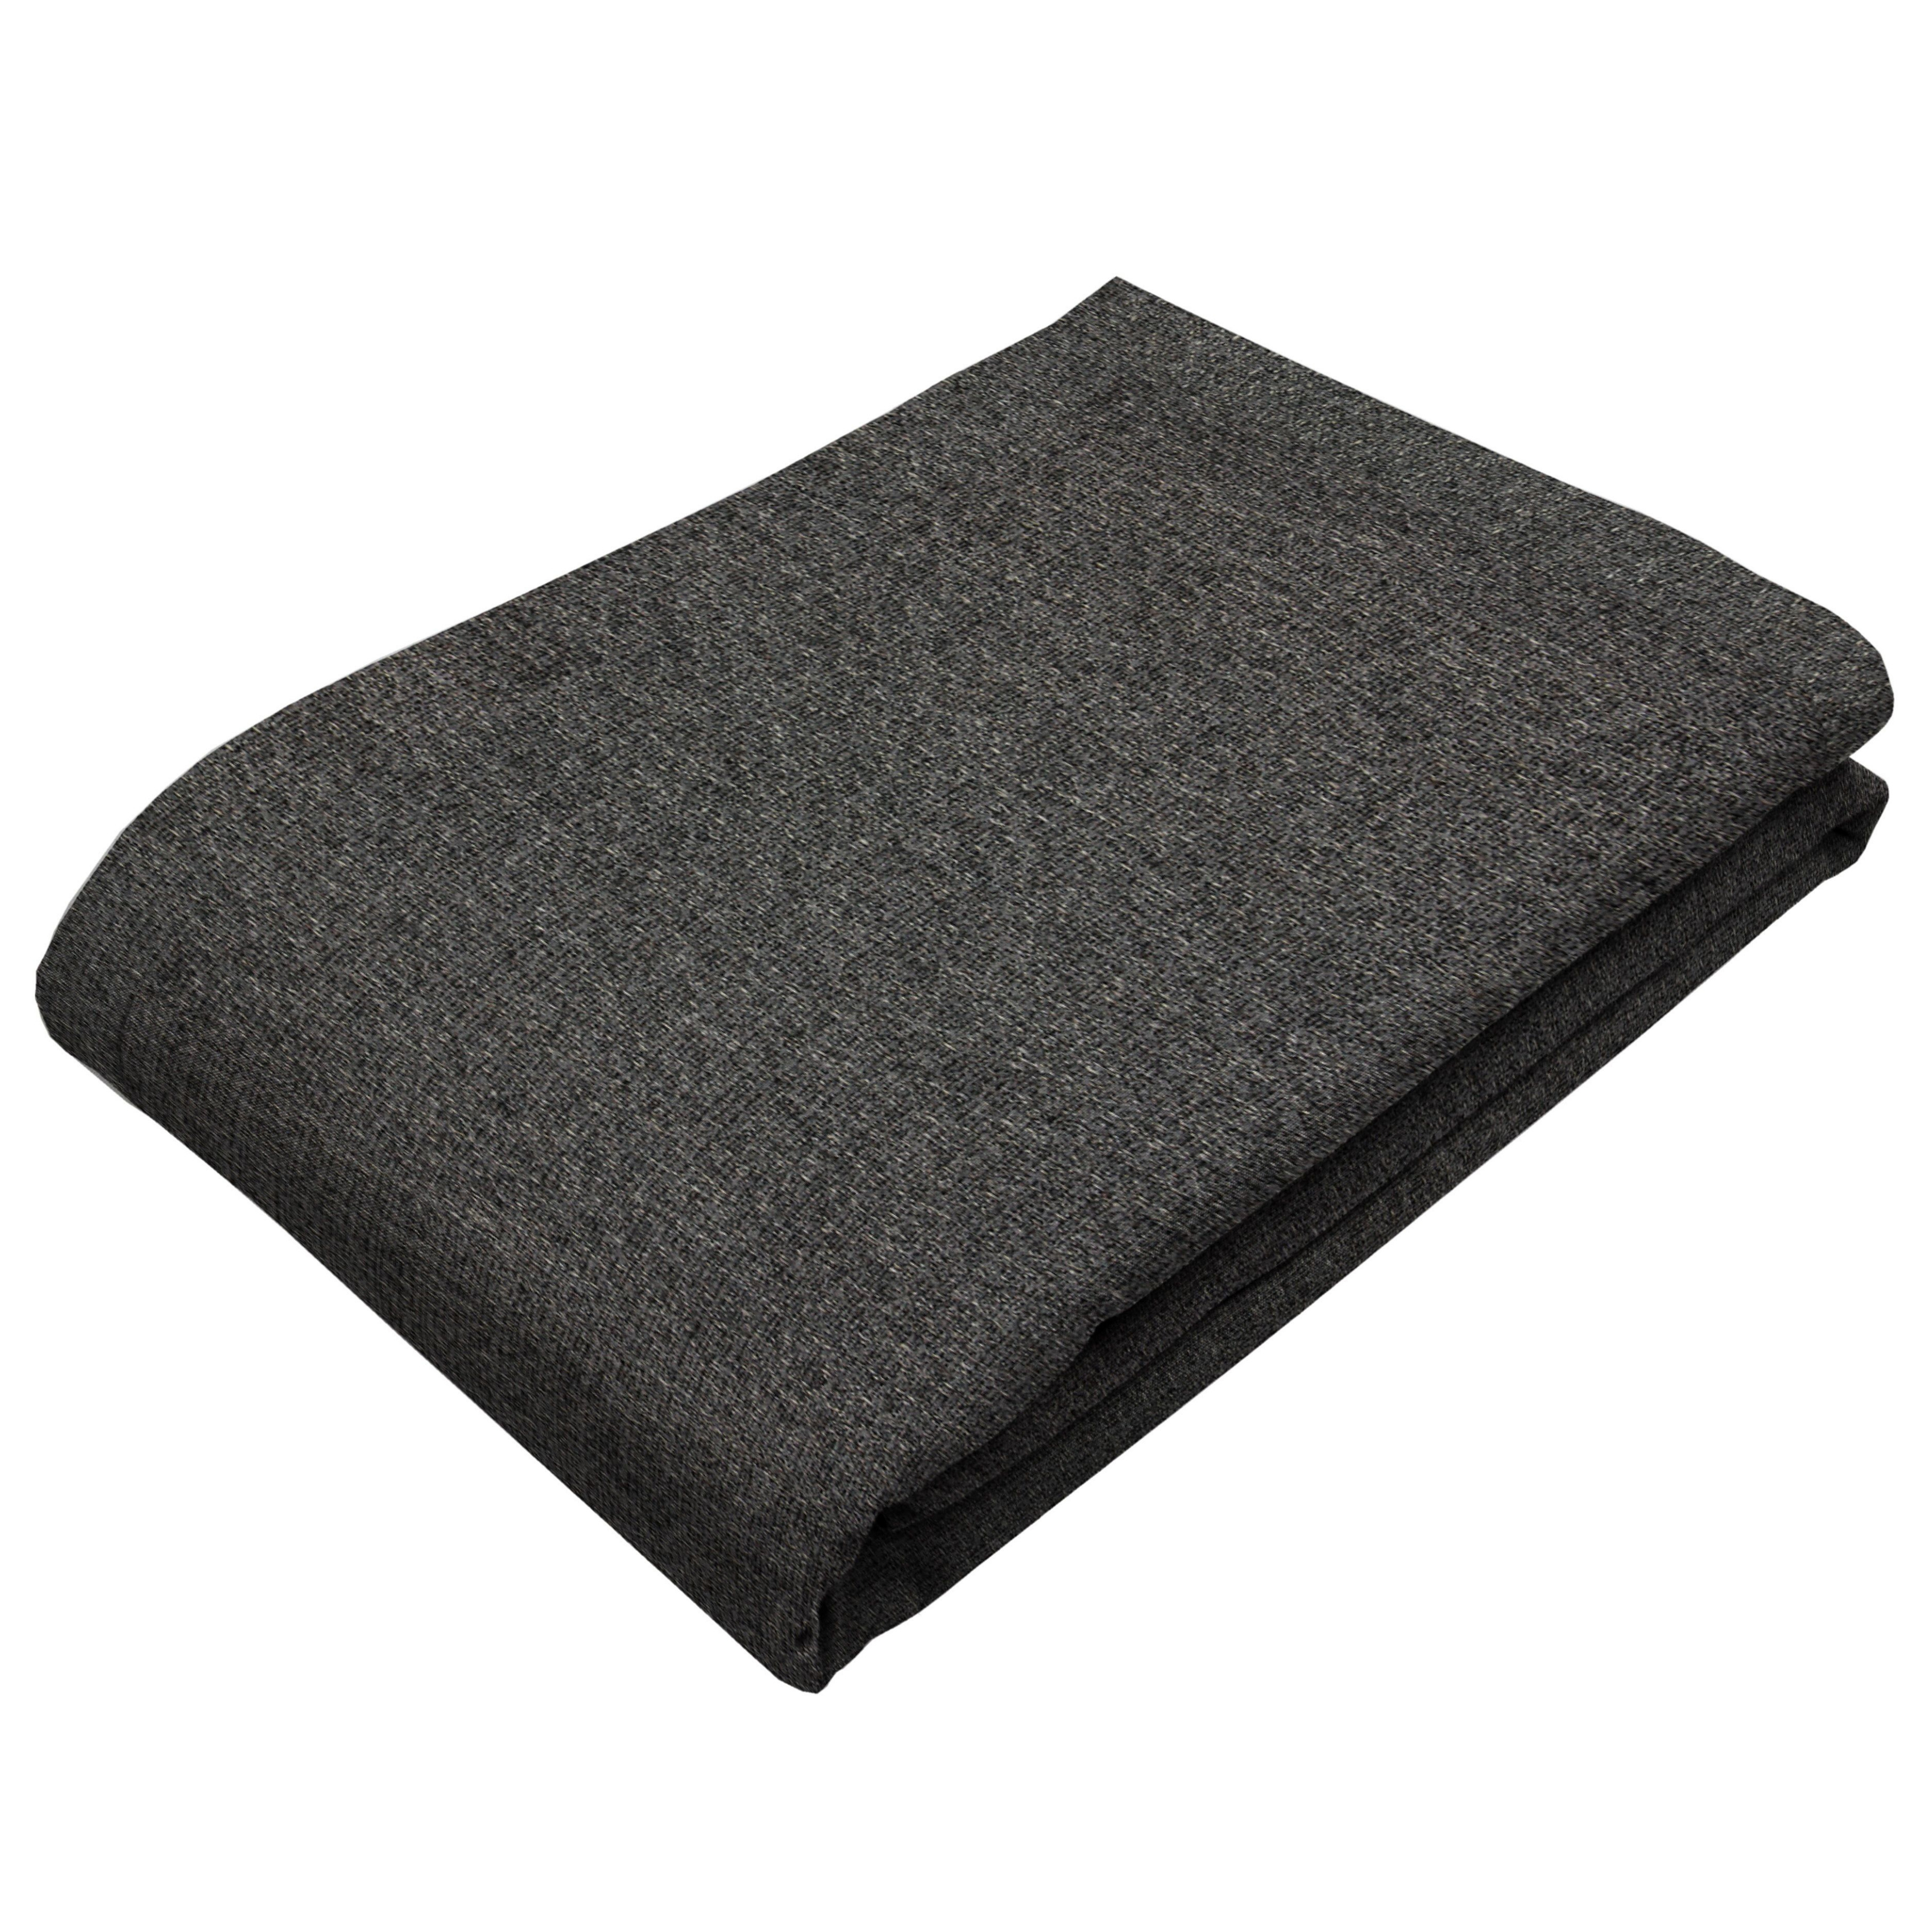 Highlands Charcoal Grey Throws & Runners, XX-Large (265cm x 380cm)